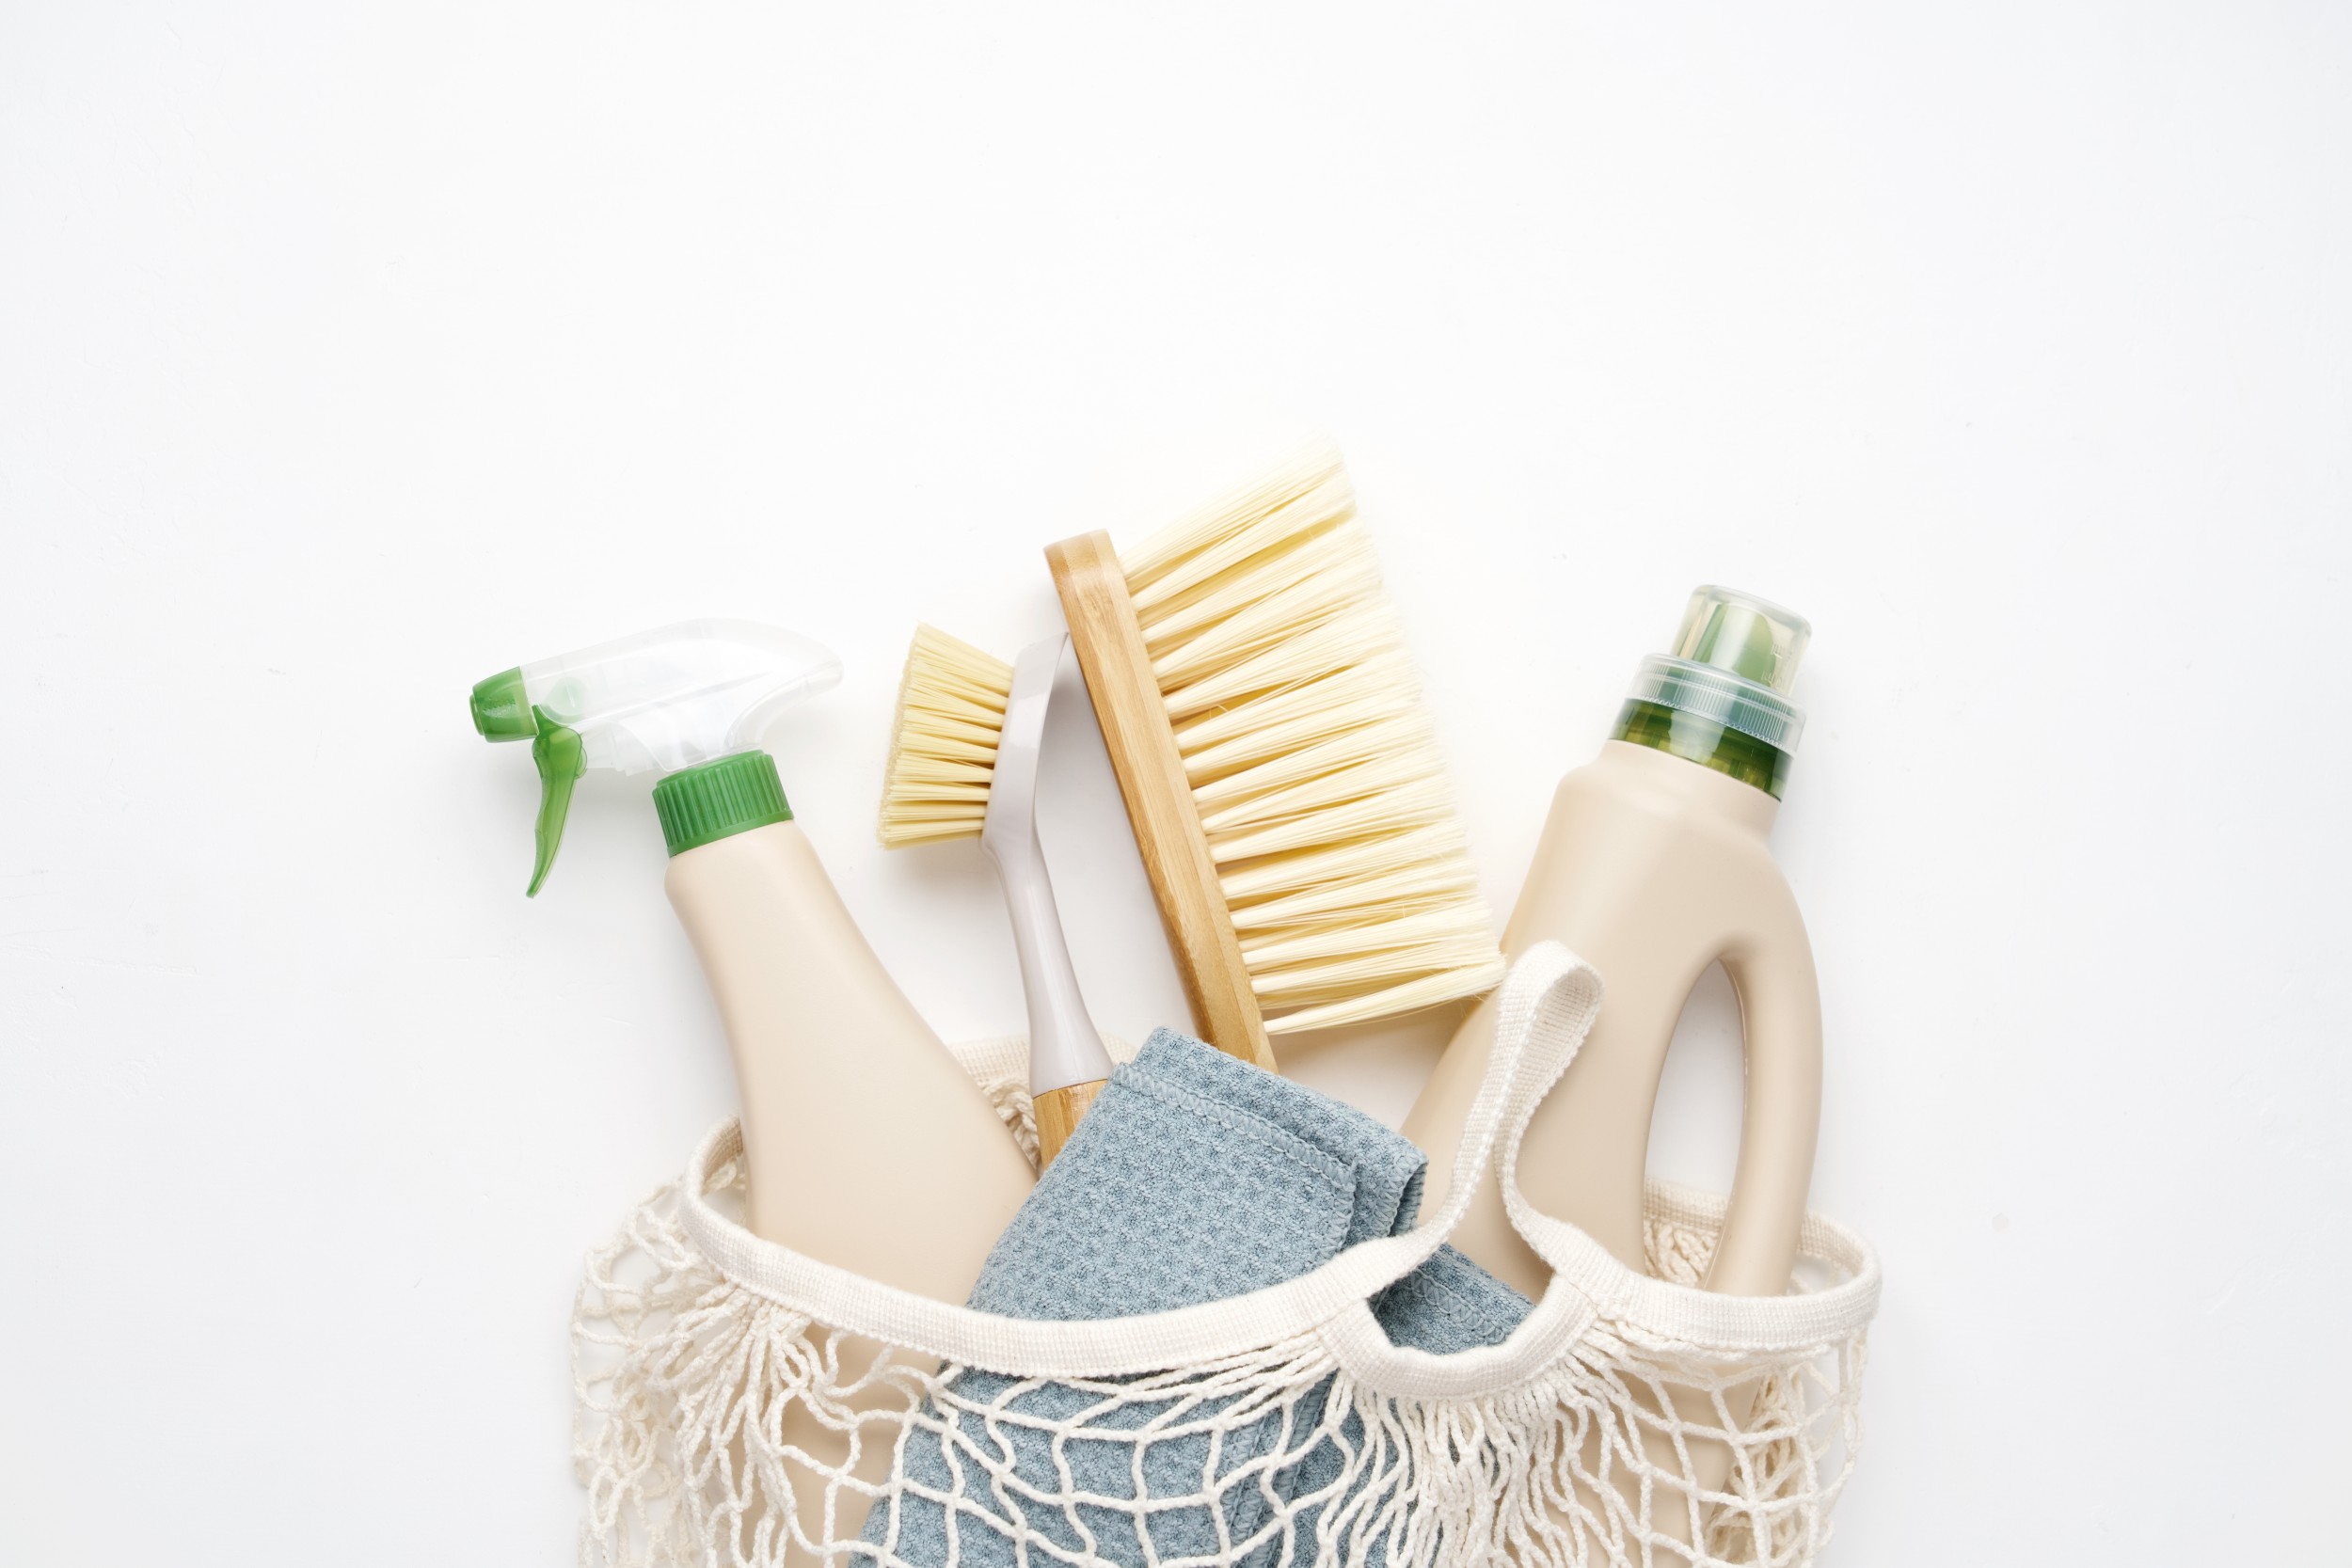 Five eco-friendly home cleaning products to try